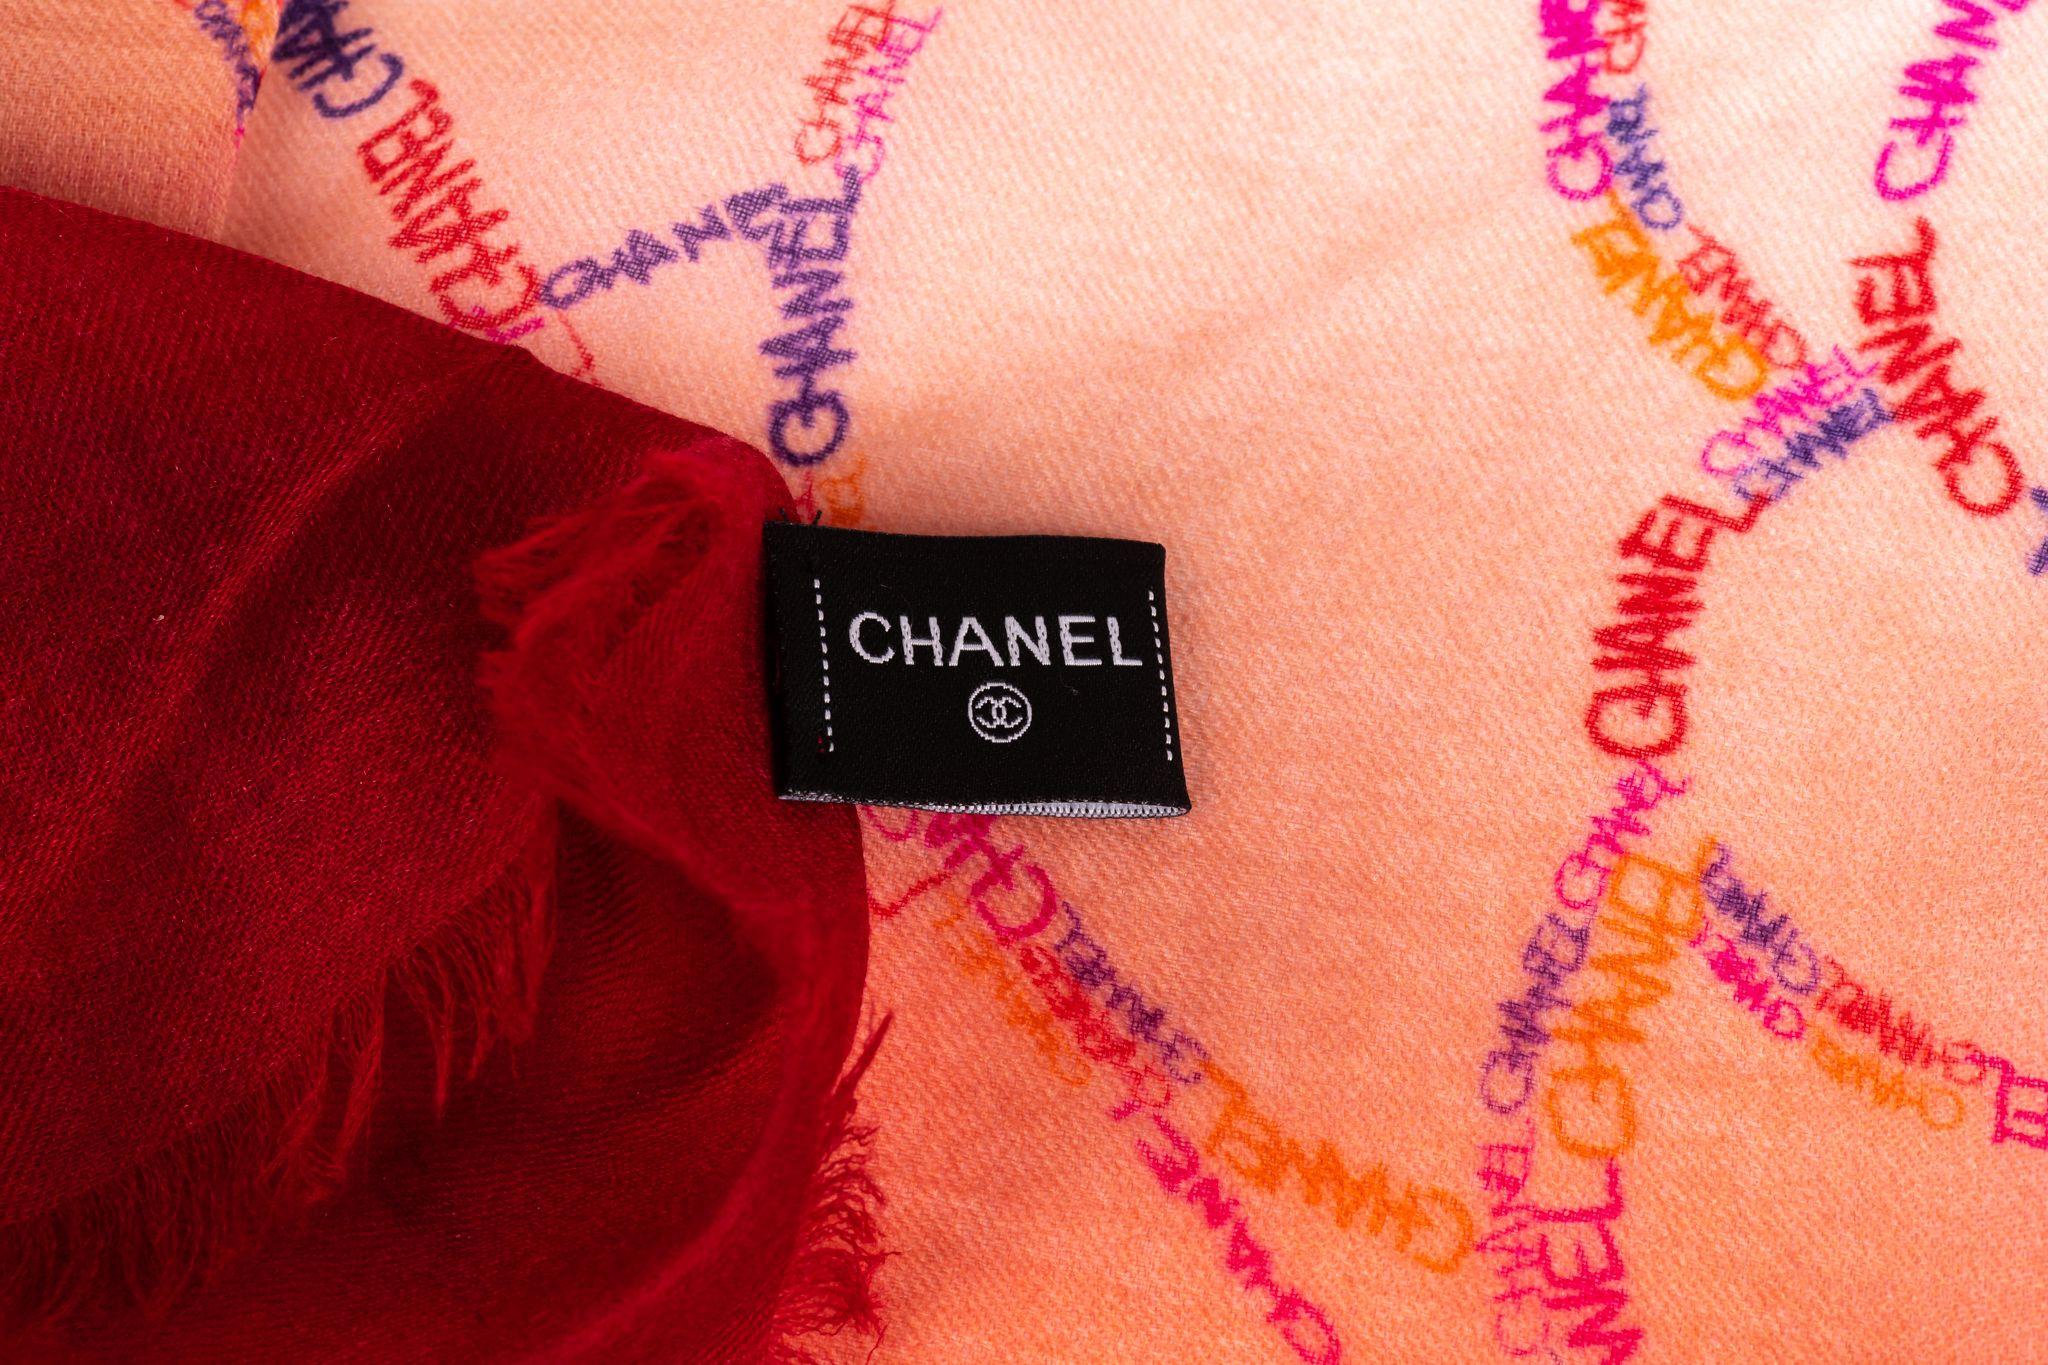 Chanel new cashmere shawl in degrade fuchsia -red . Camellia drawings. Care tag attached.